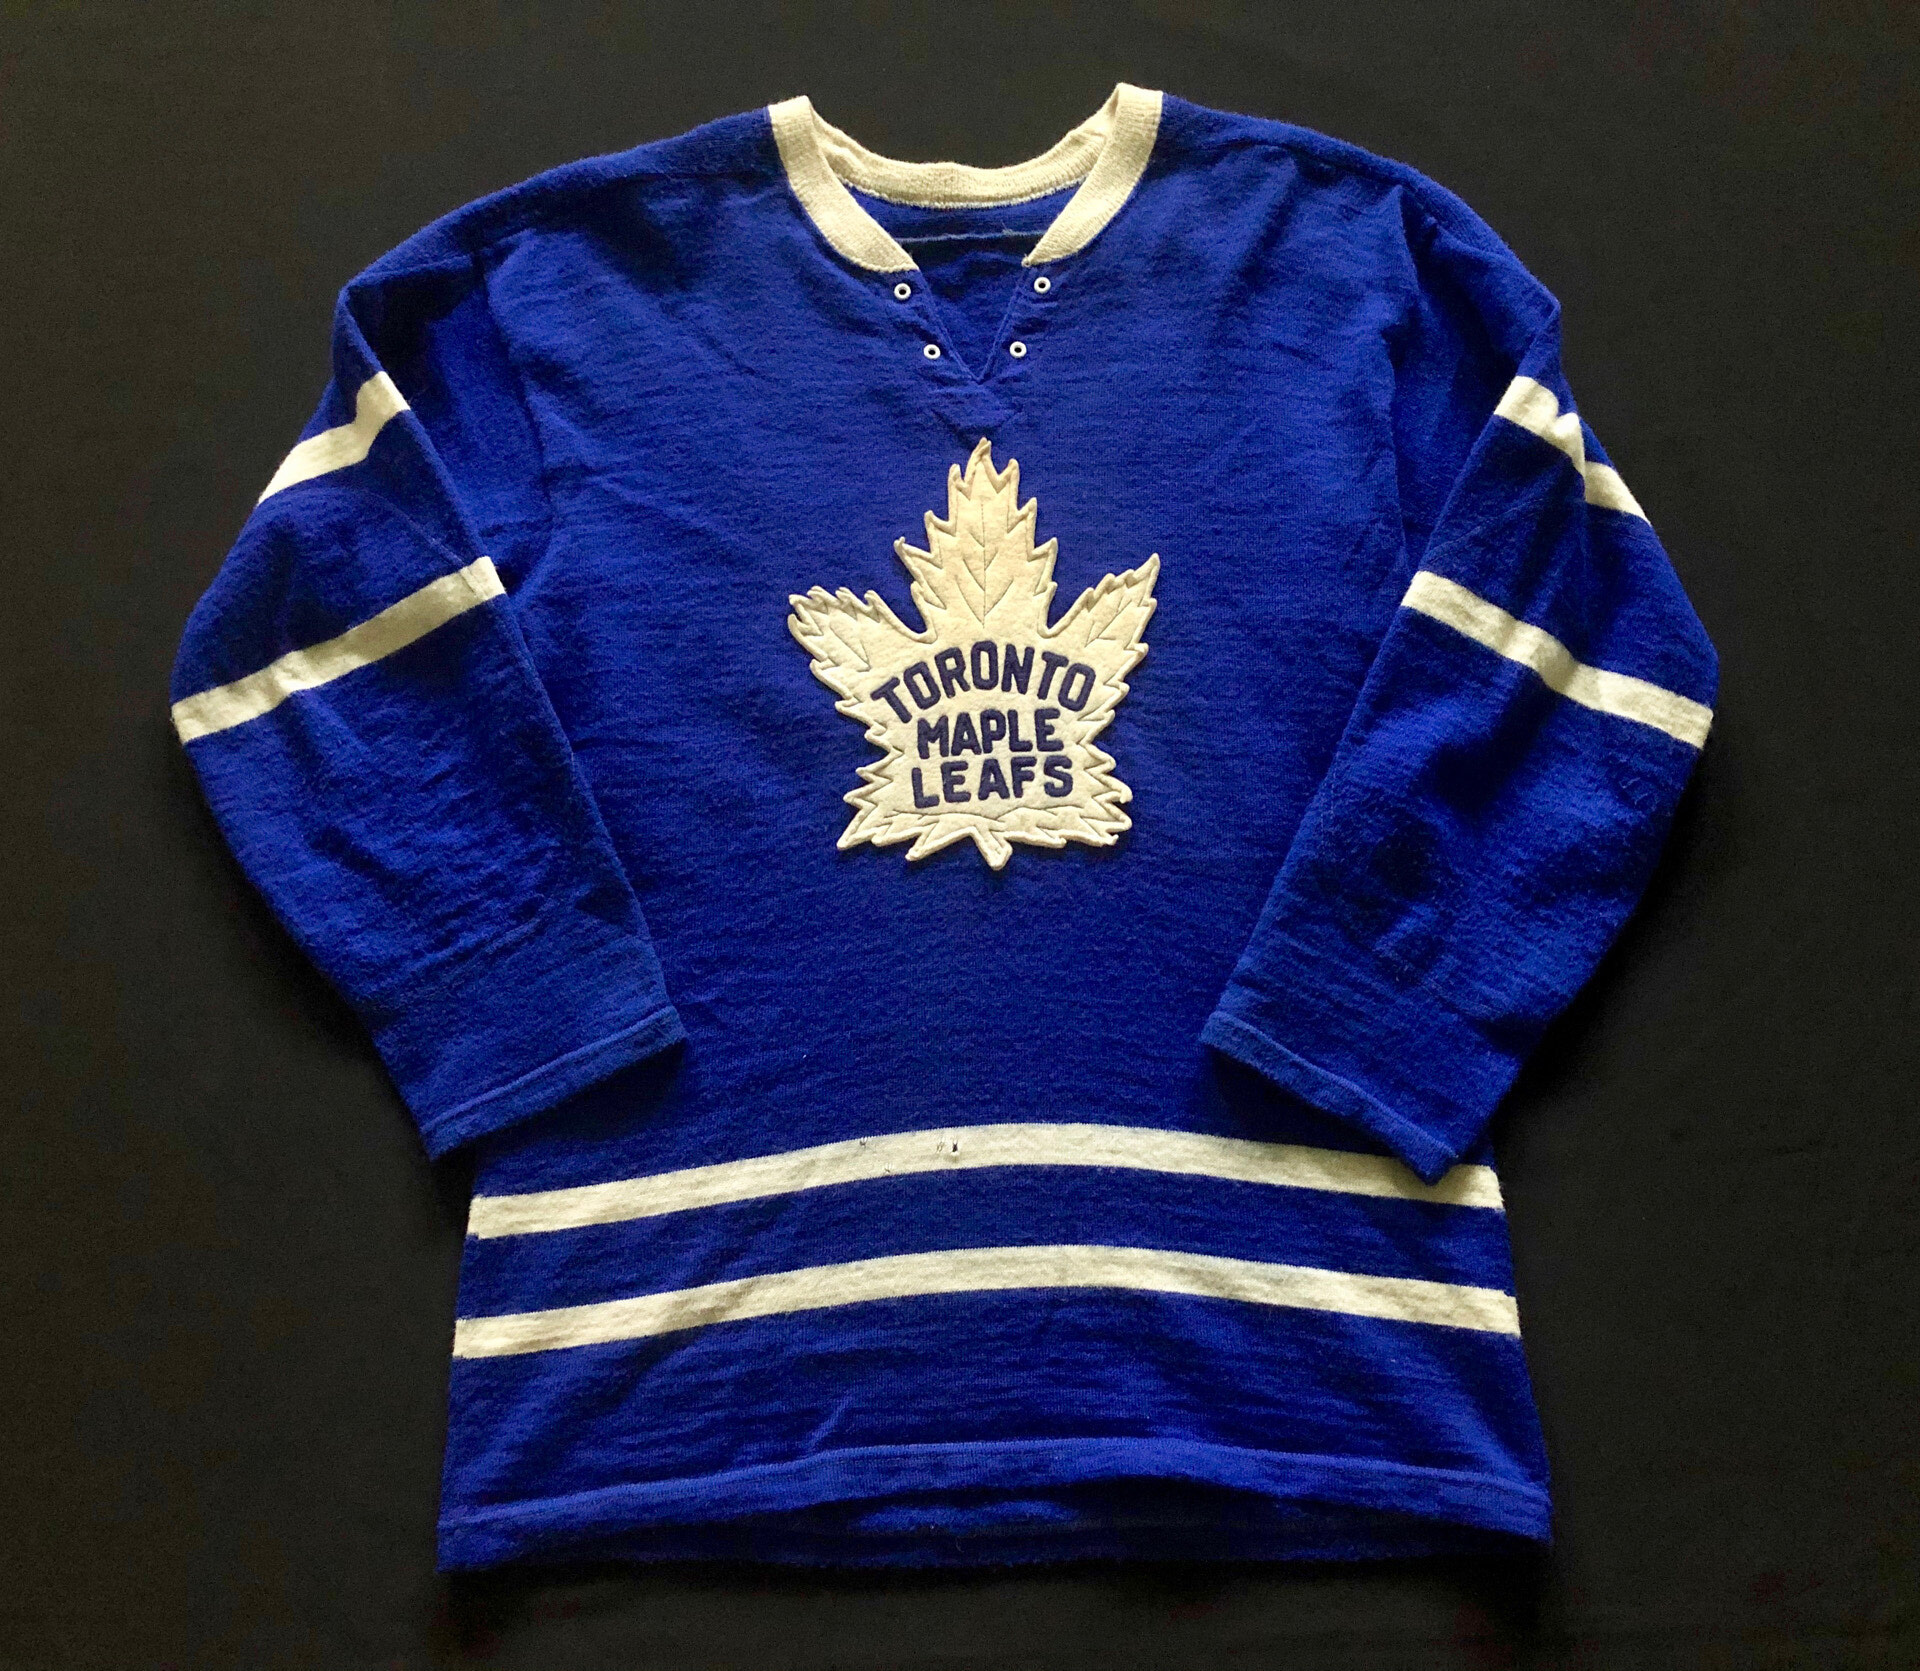 Anybody know why these Leafs jerseys aren't in the game? (Or are